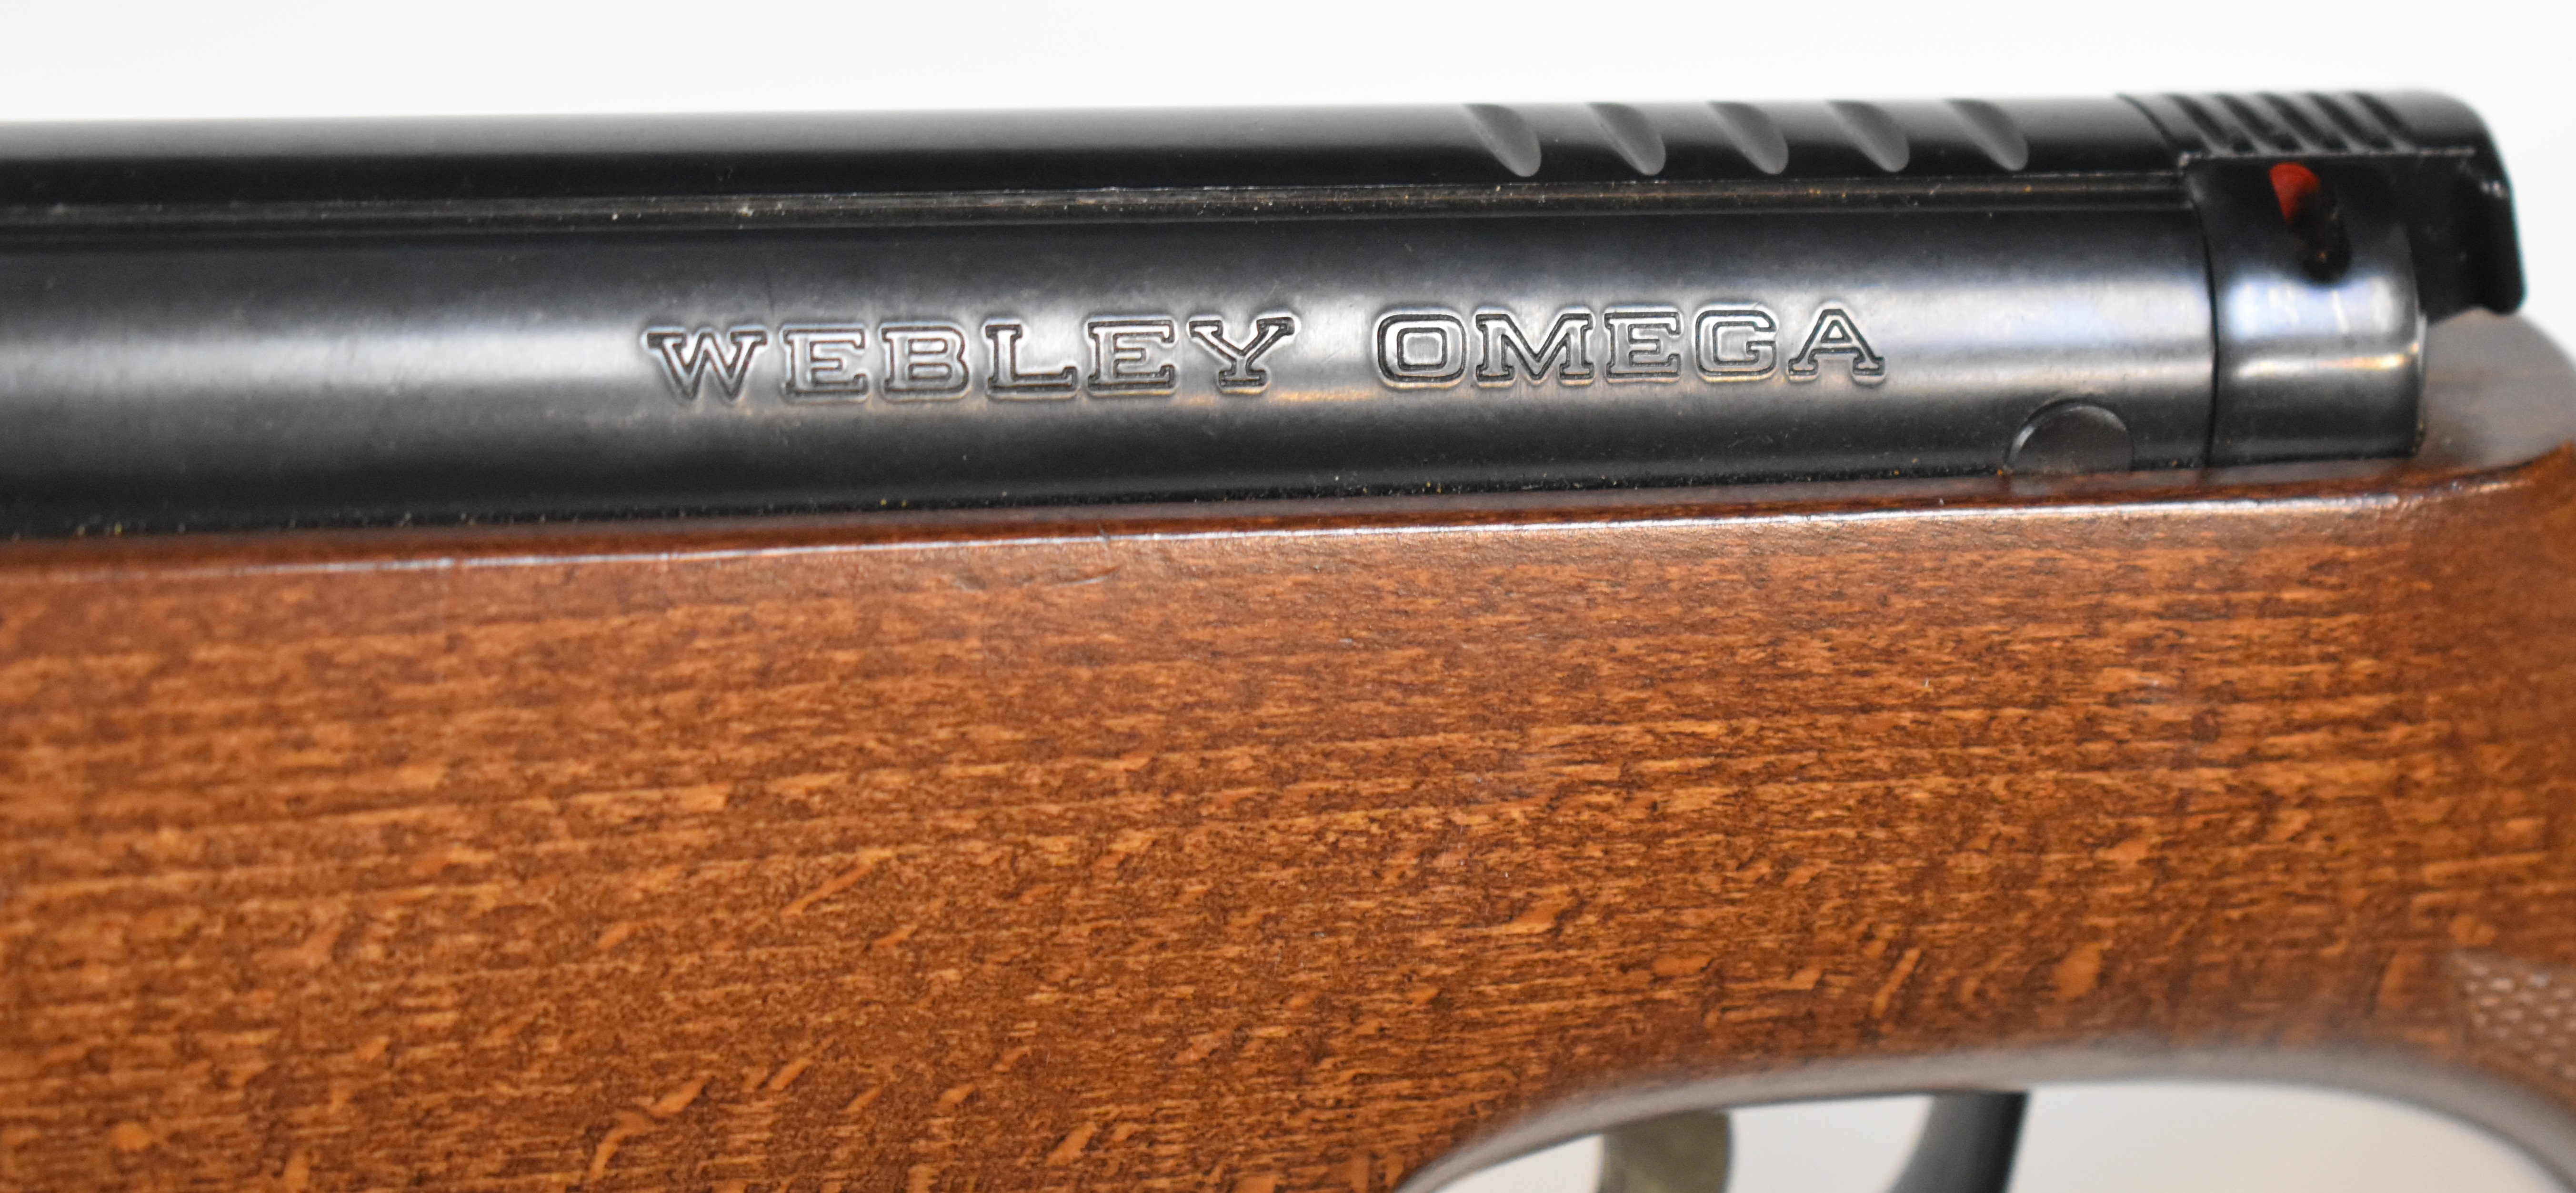 Webley Omega .177 air rifle with chequered semi-pistol grip, raised cheek piece, padded canvas and - Image 11 of 12